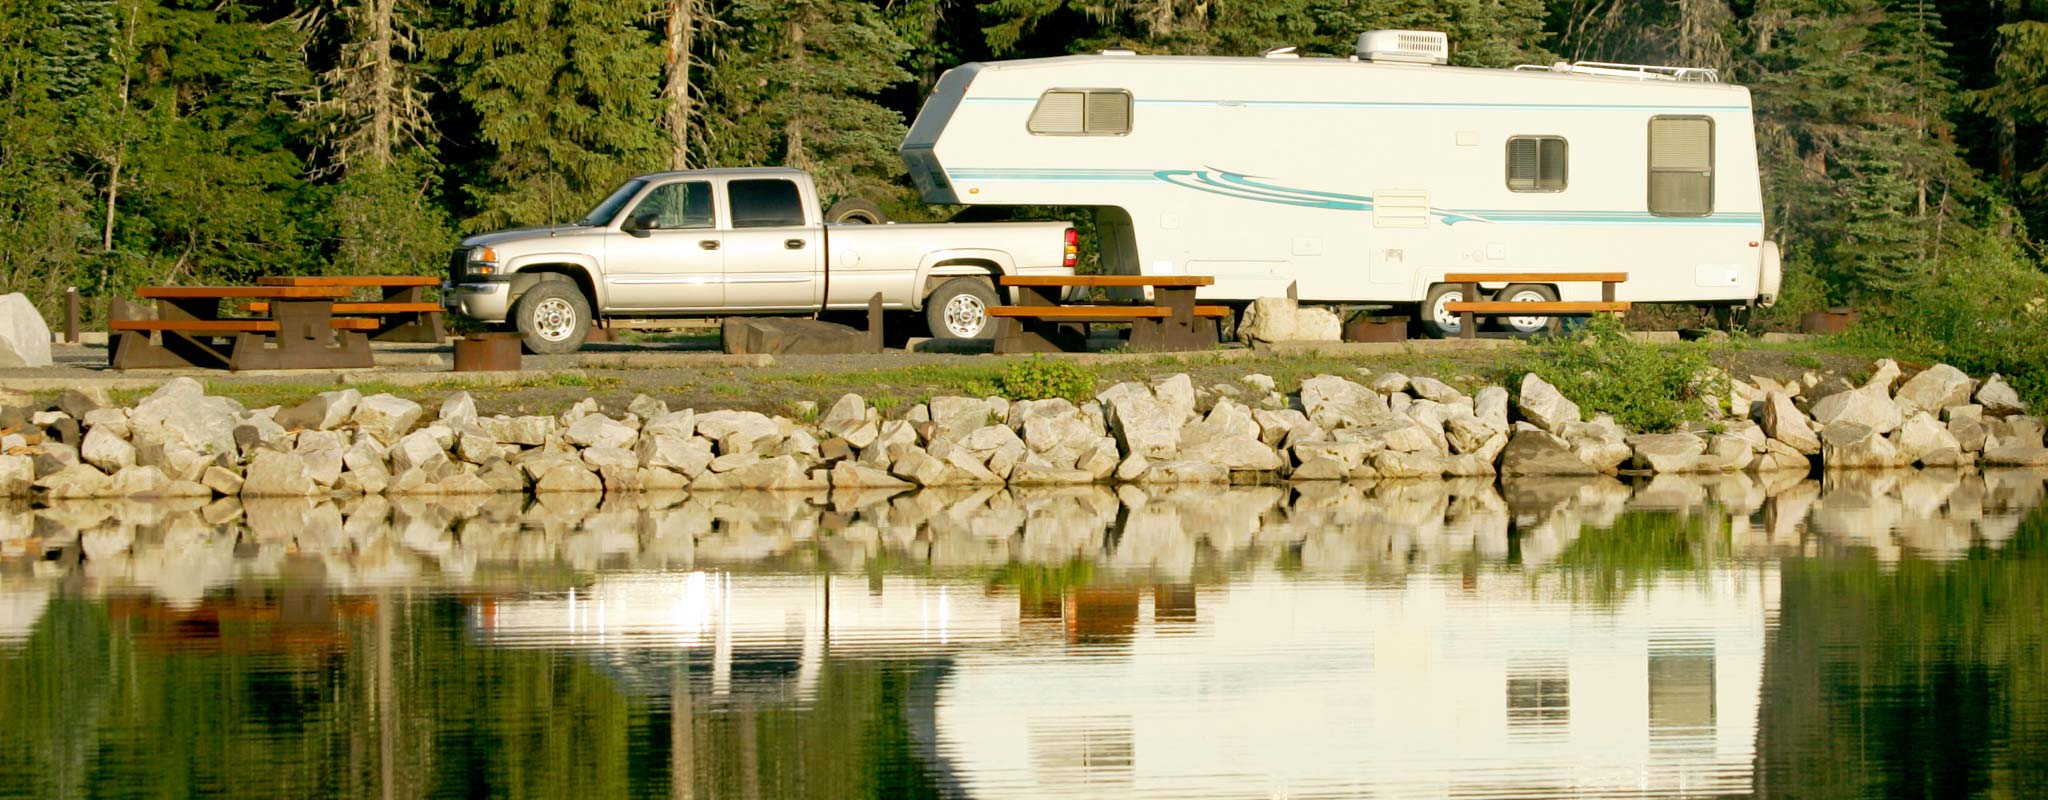 A pickup with a fifth wheel travel trailer parked in a campground next to a lake.